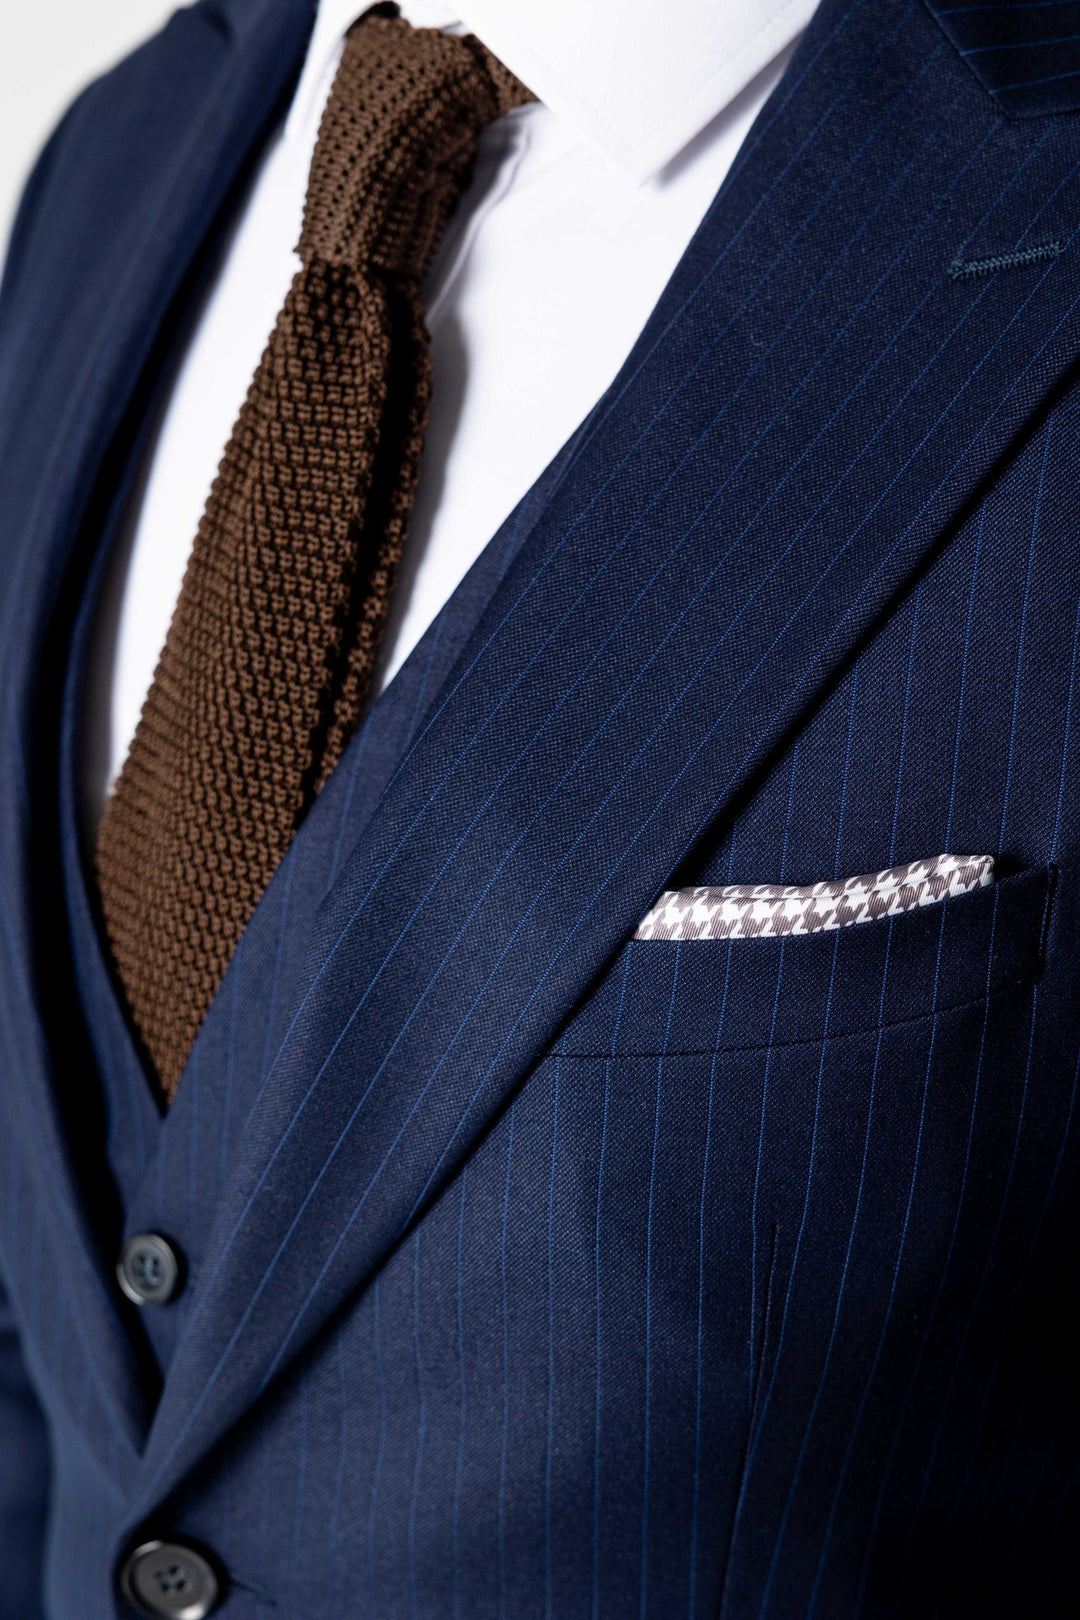 Three-piece blue suit with stripes